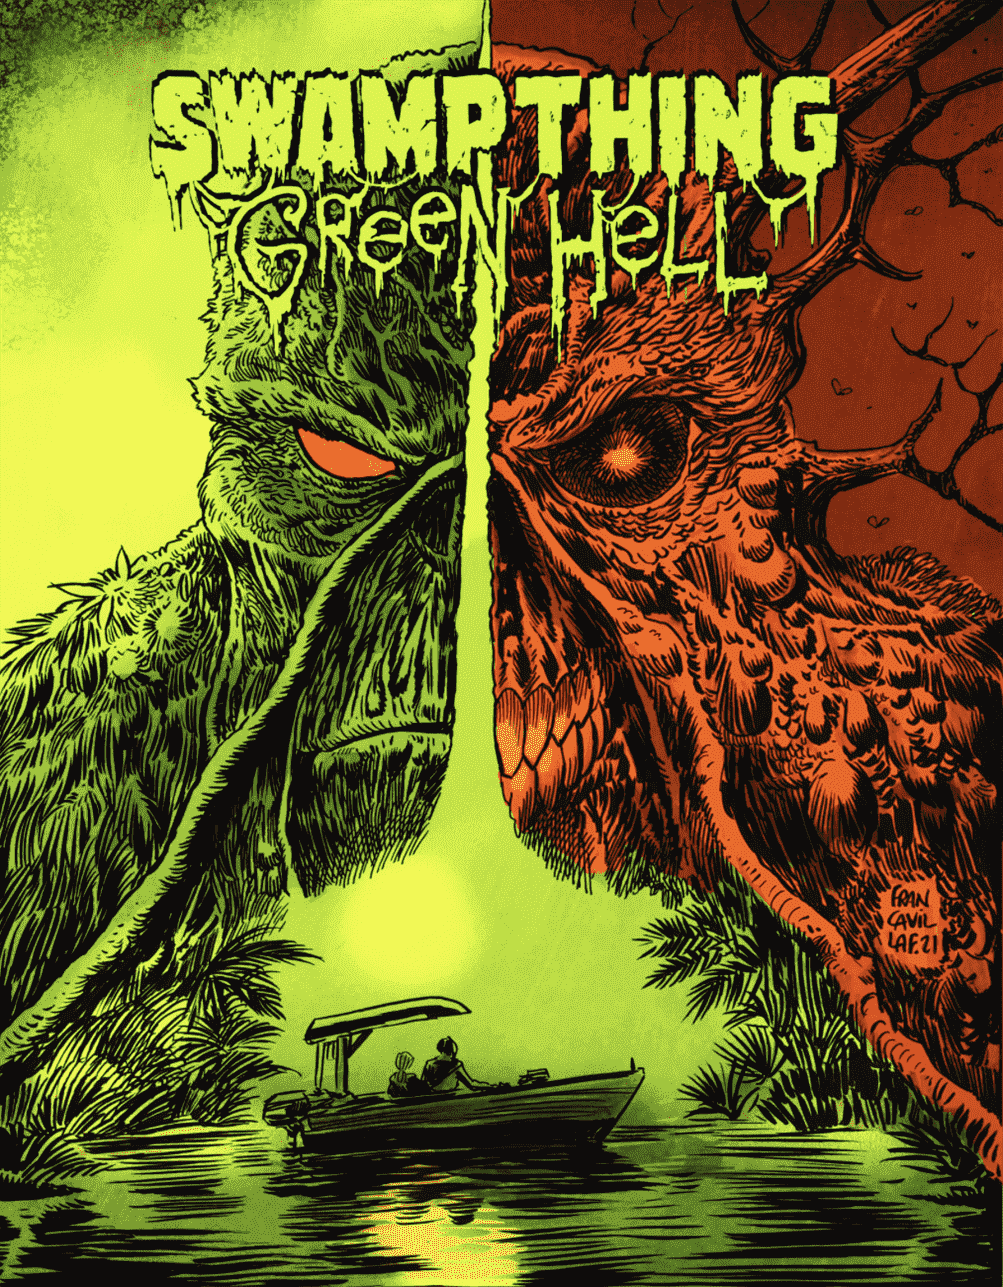 Swamp Thing : couverture de la variante Green Hell #1